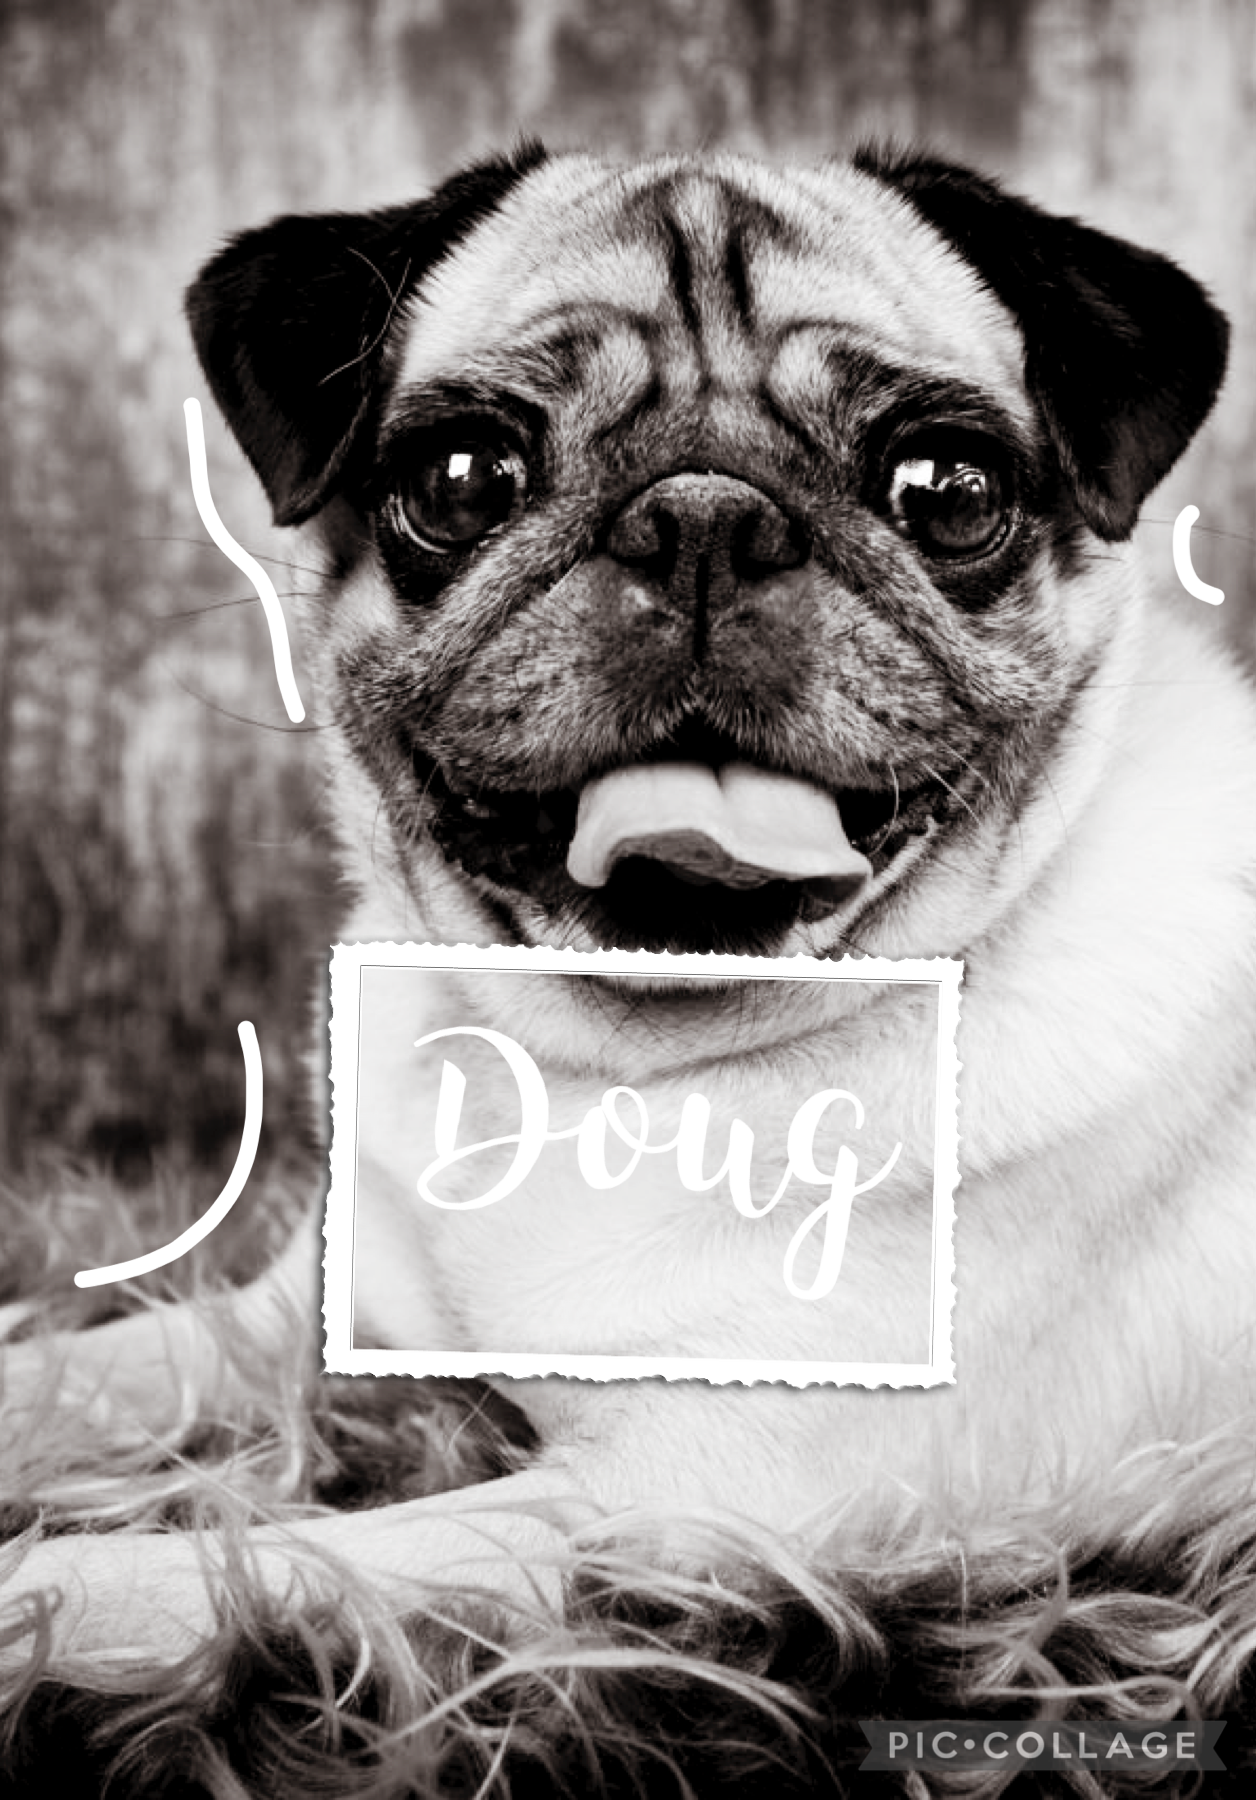 Doug is not my pug, just so you know!